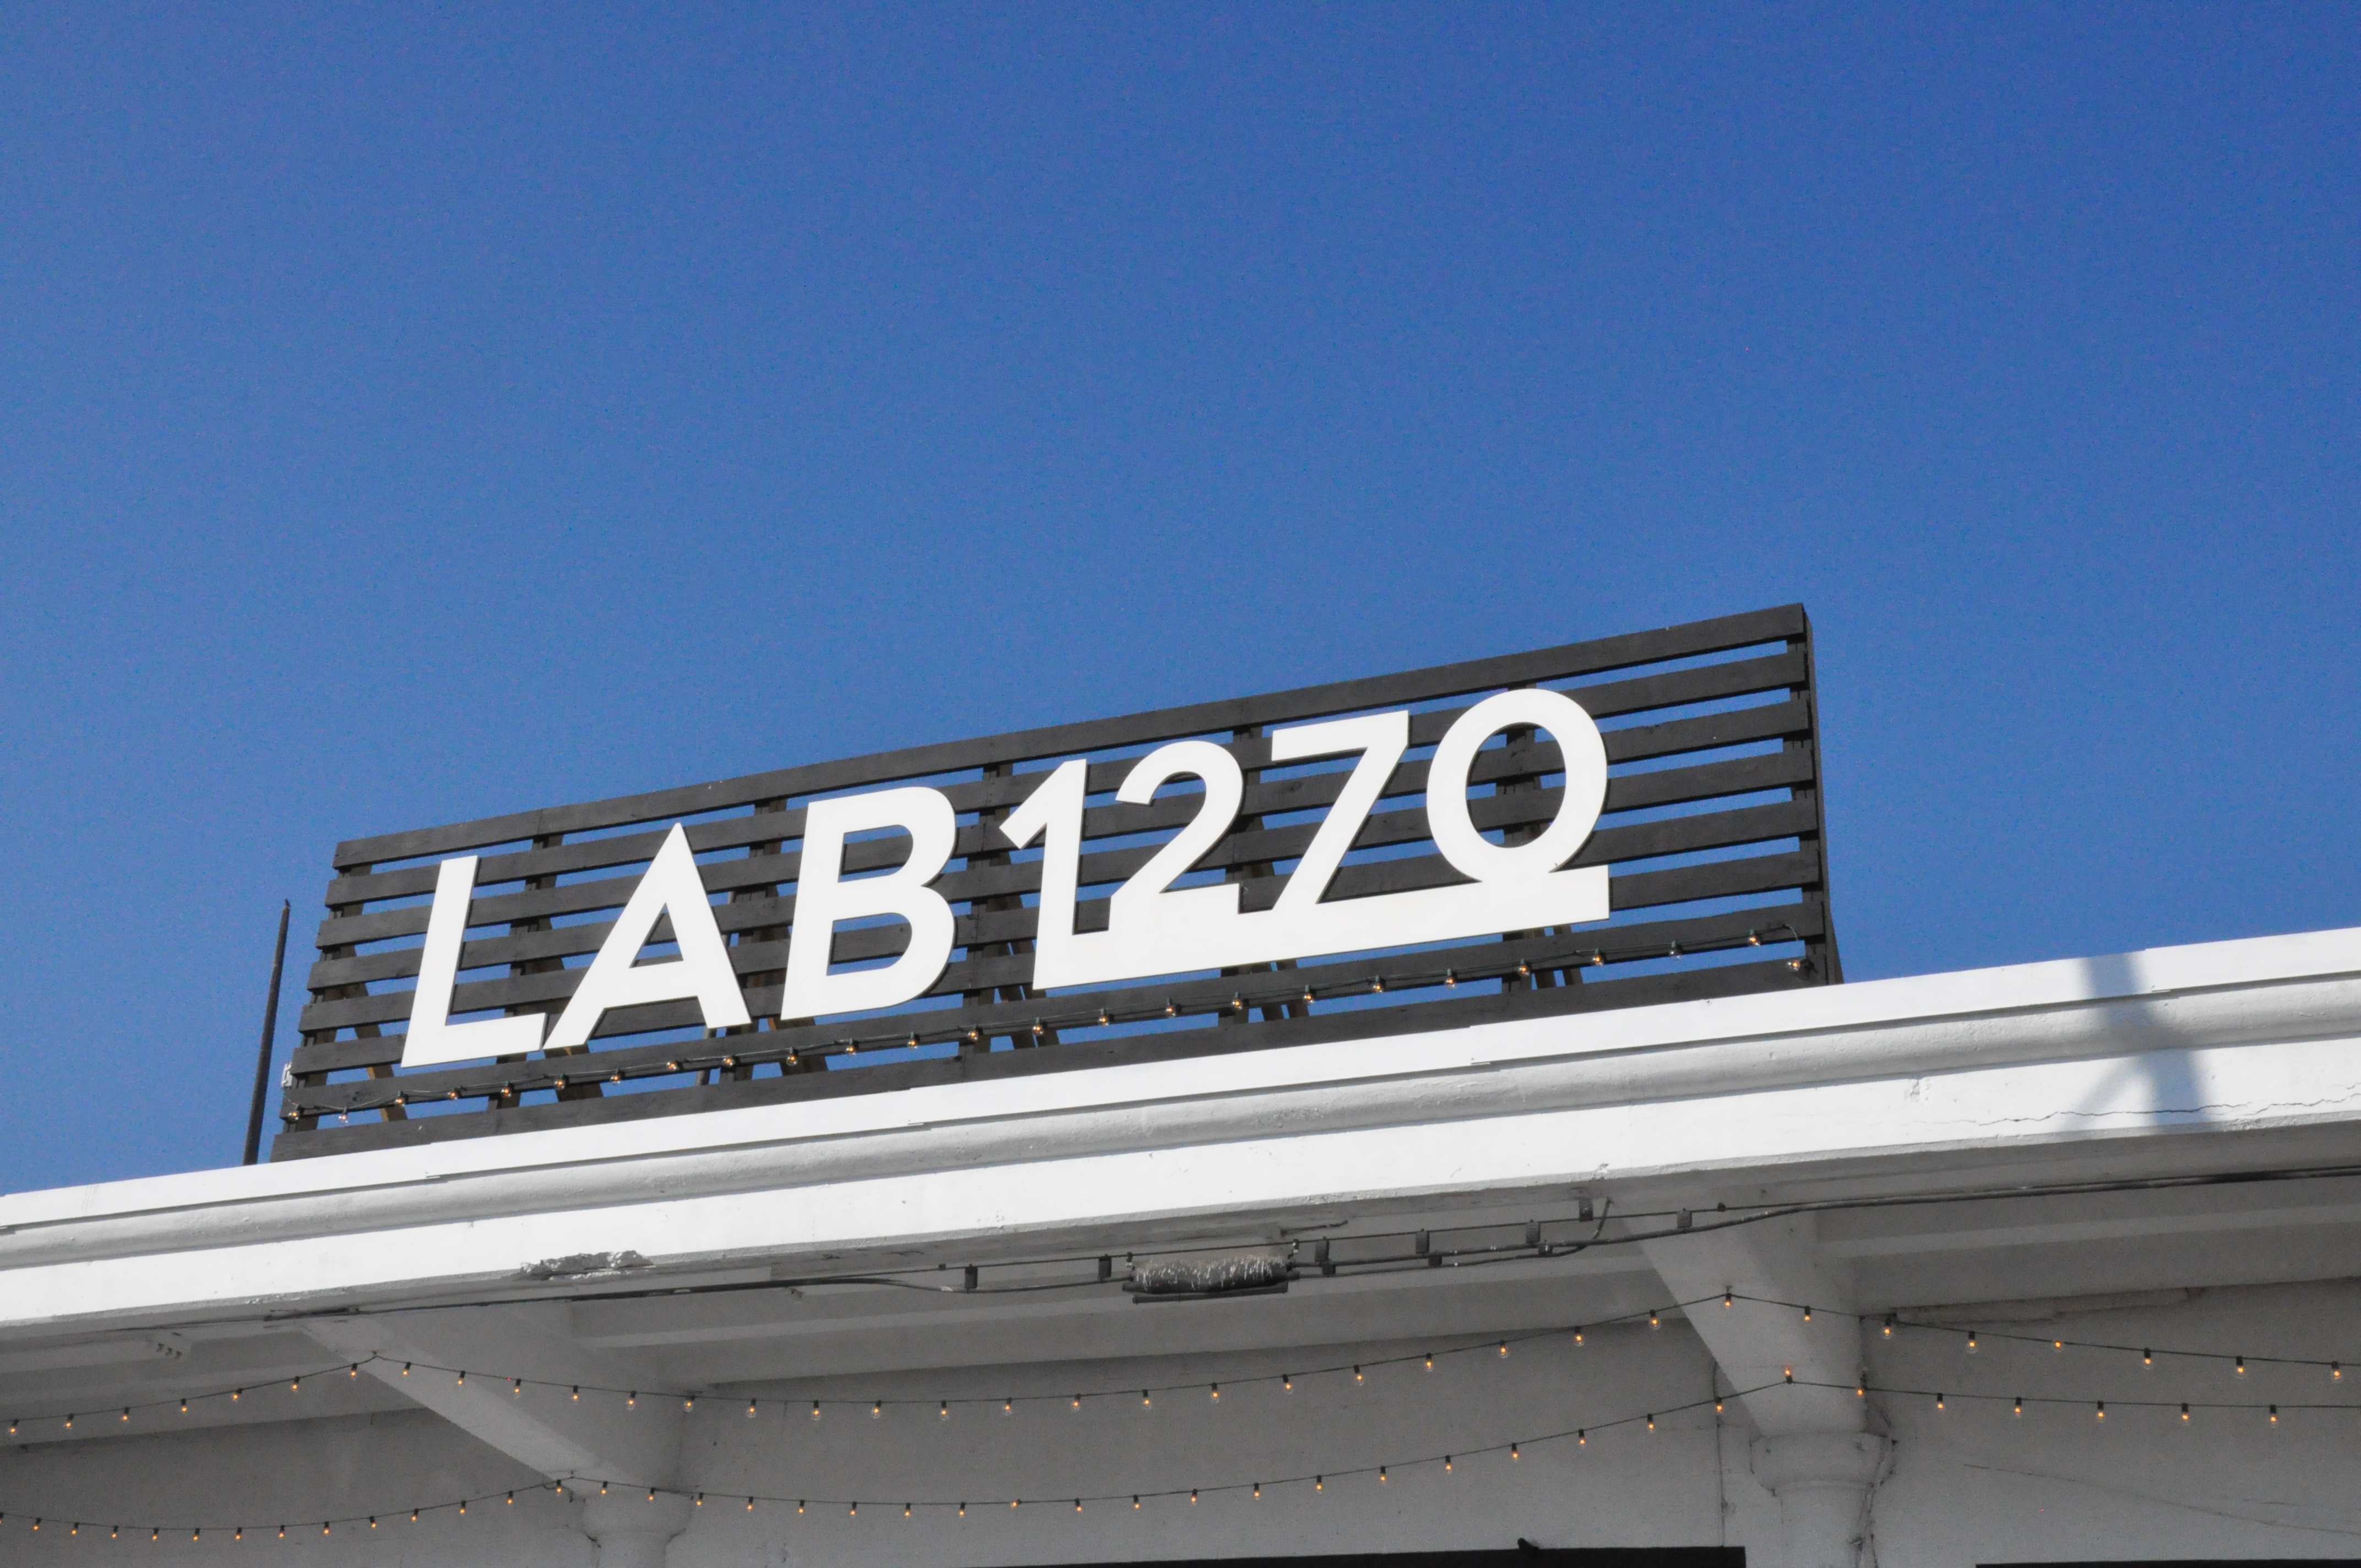 Inside Lab 1270: Union Market’s hub for small businesses